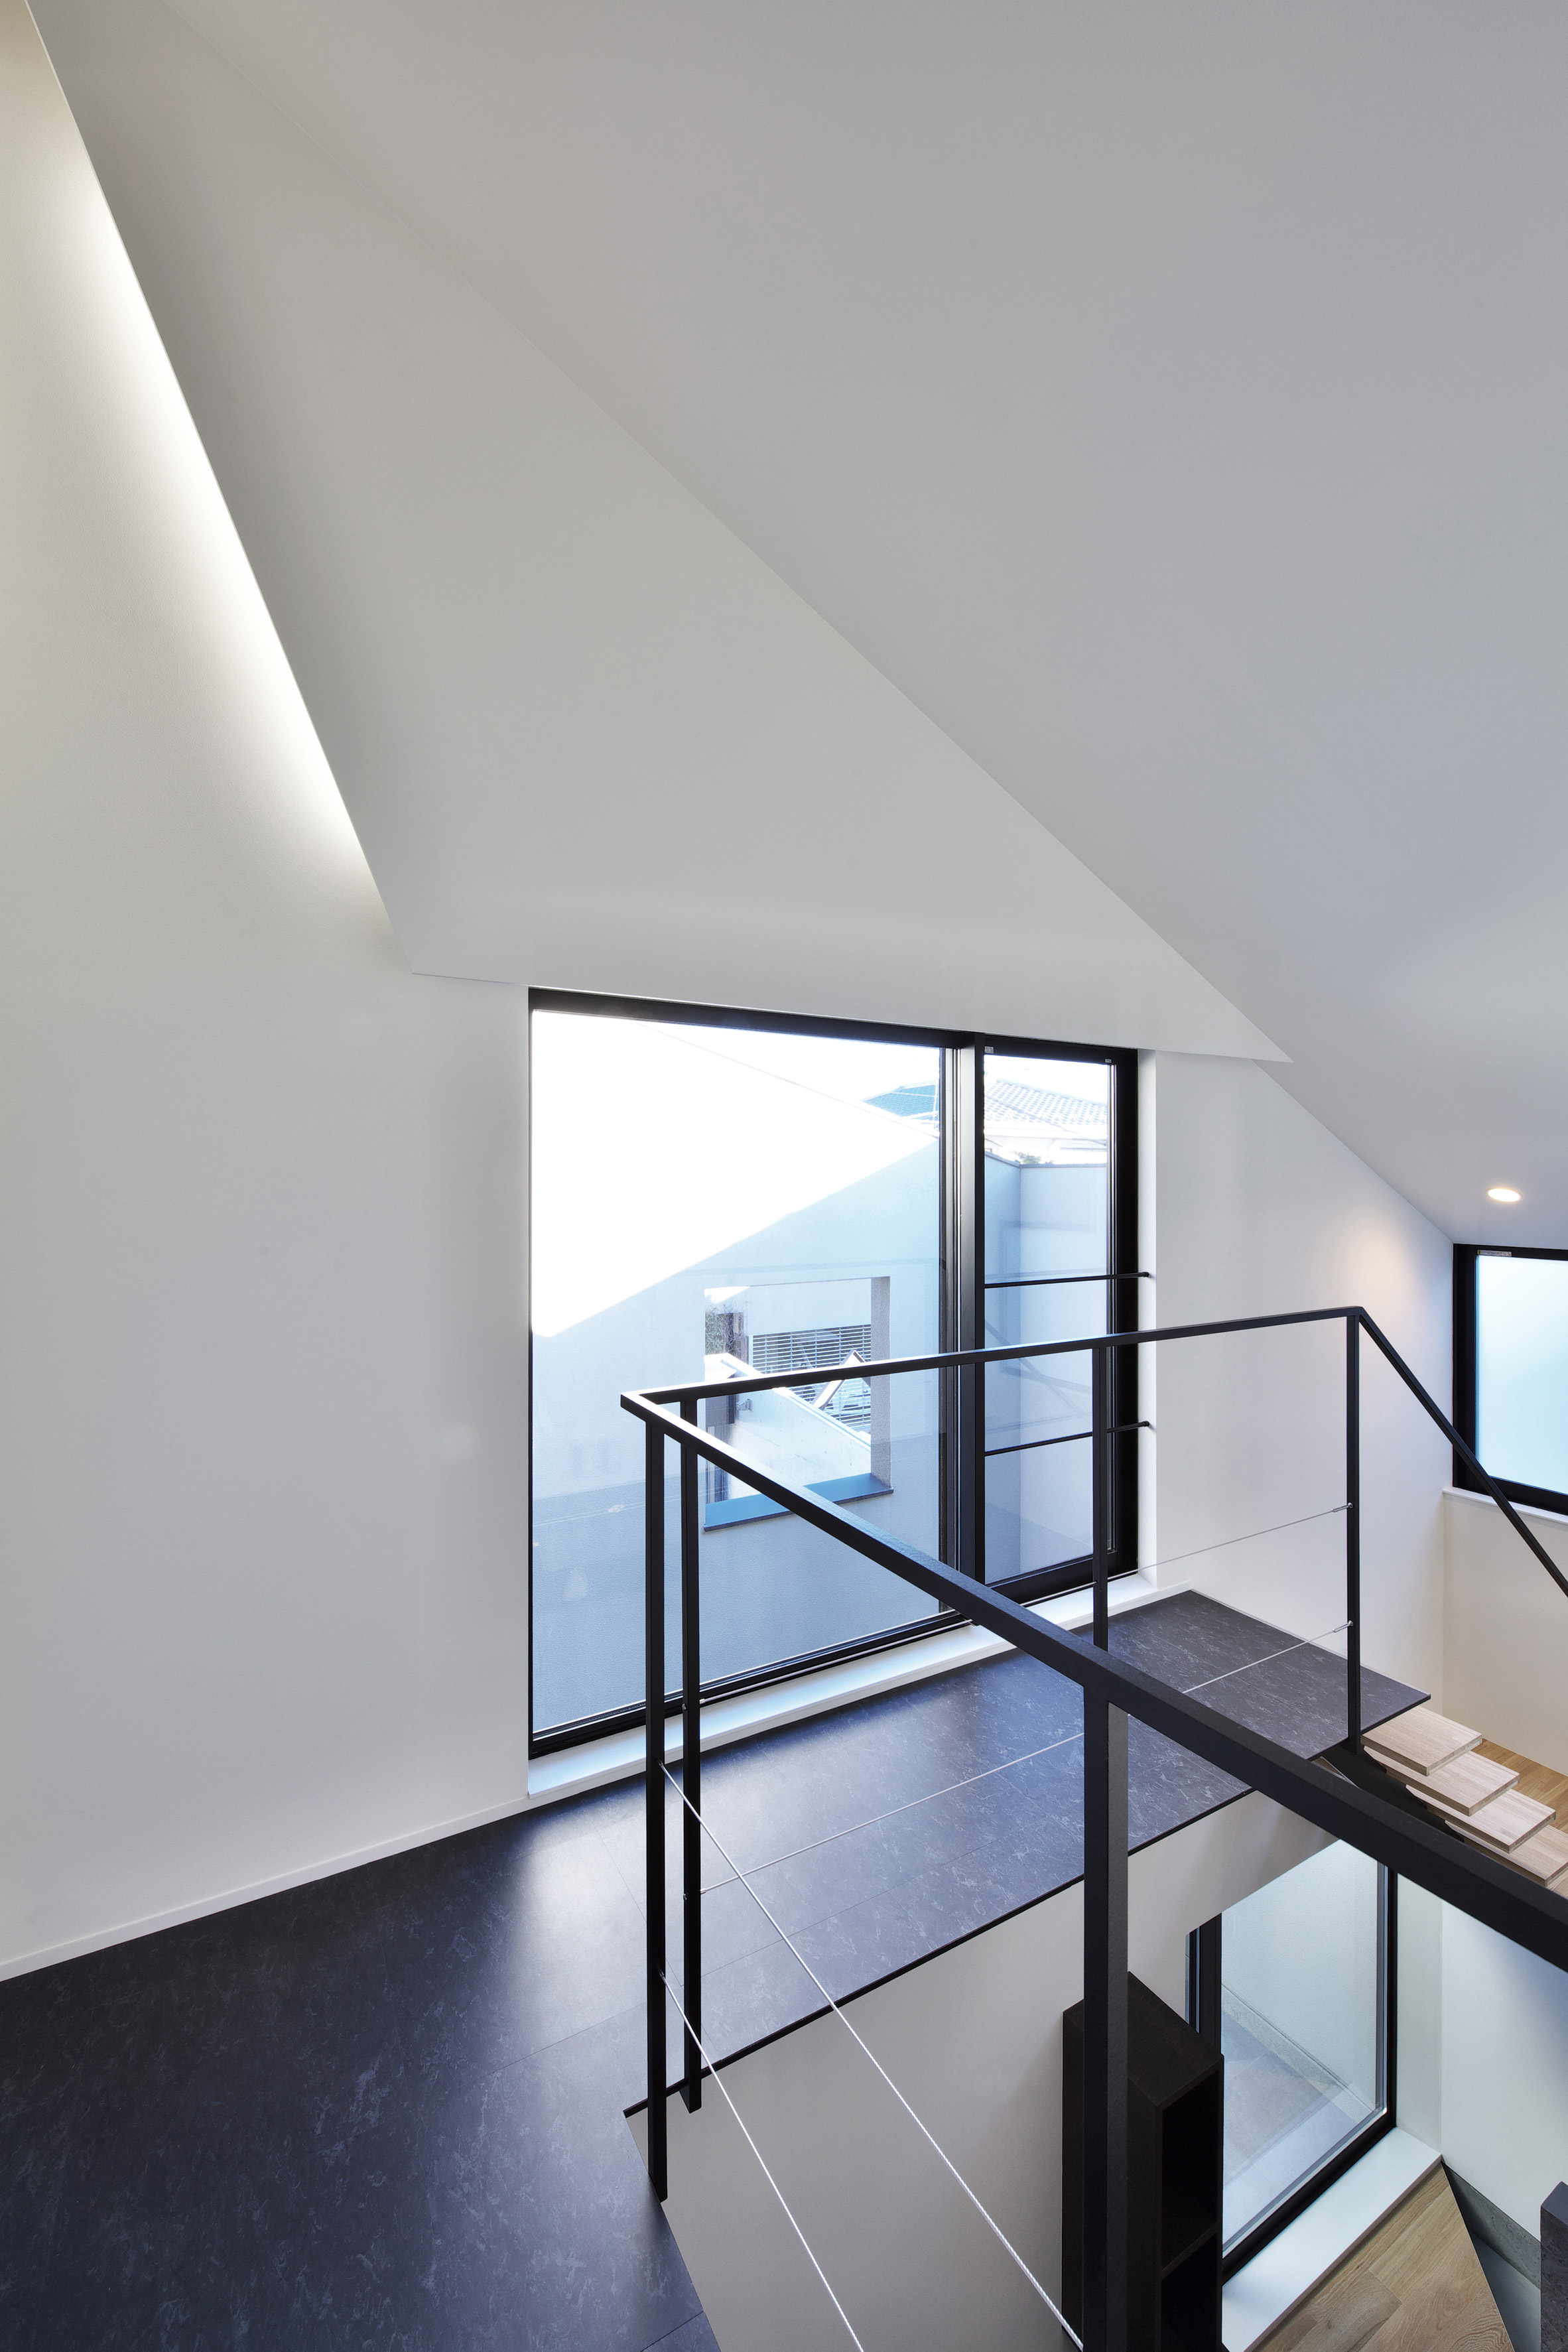 house-of-fluctuations-satoru-hirota-architects-architecture-tokyo-japan-residential_dezeen_2364_col_30